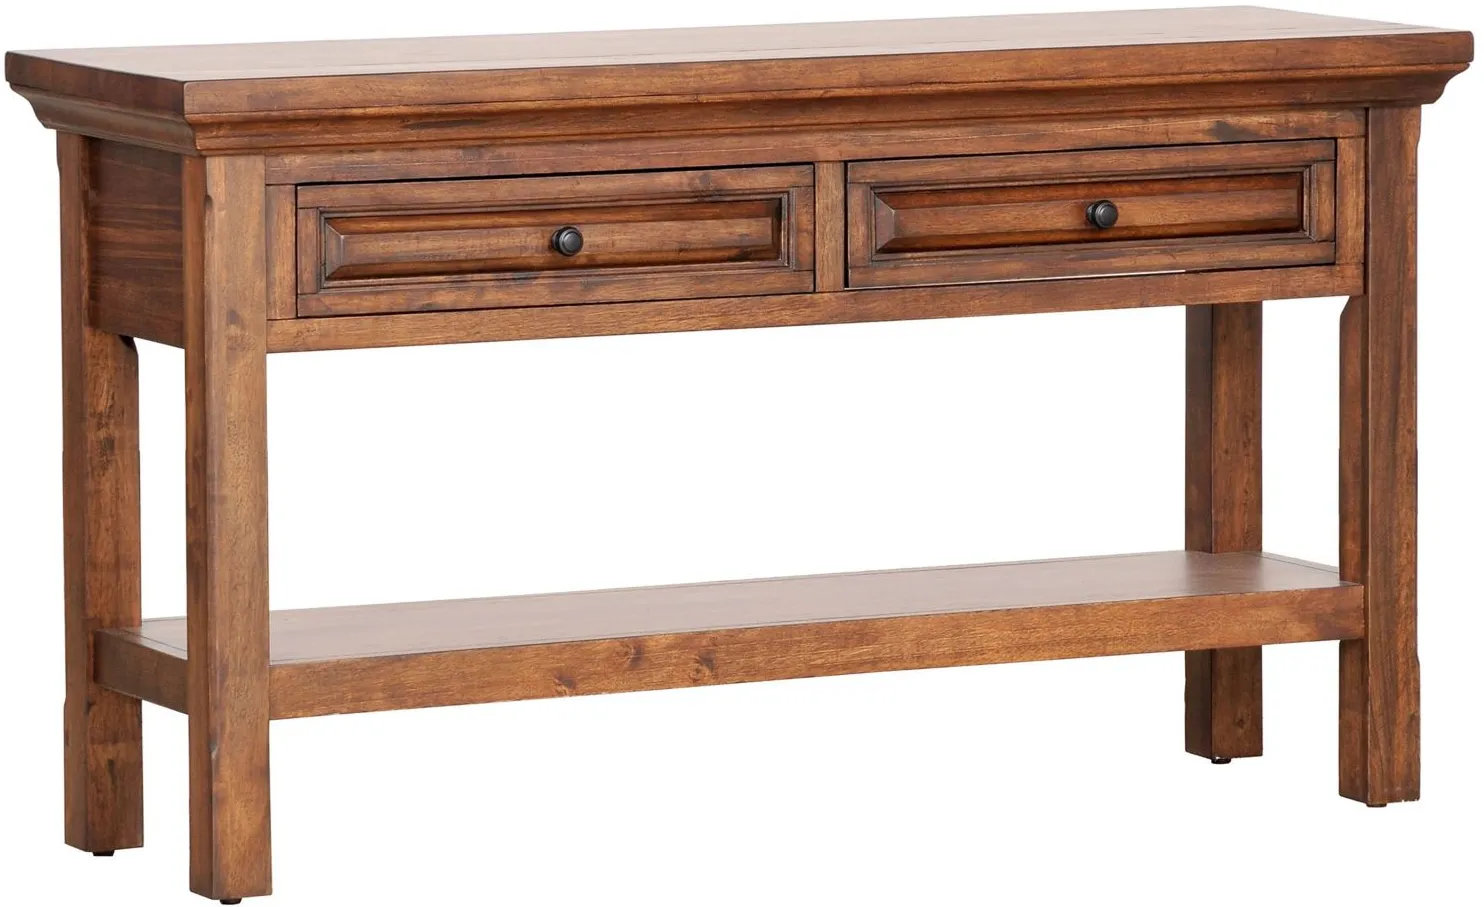 HillCrest Two Drawer Sofa Table in Old Chestnut by Napa Furniture Design